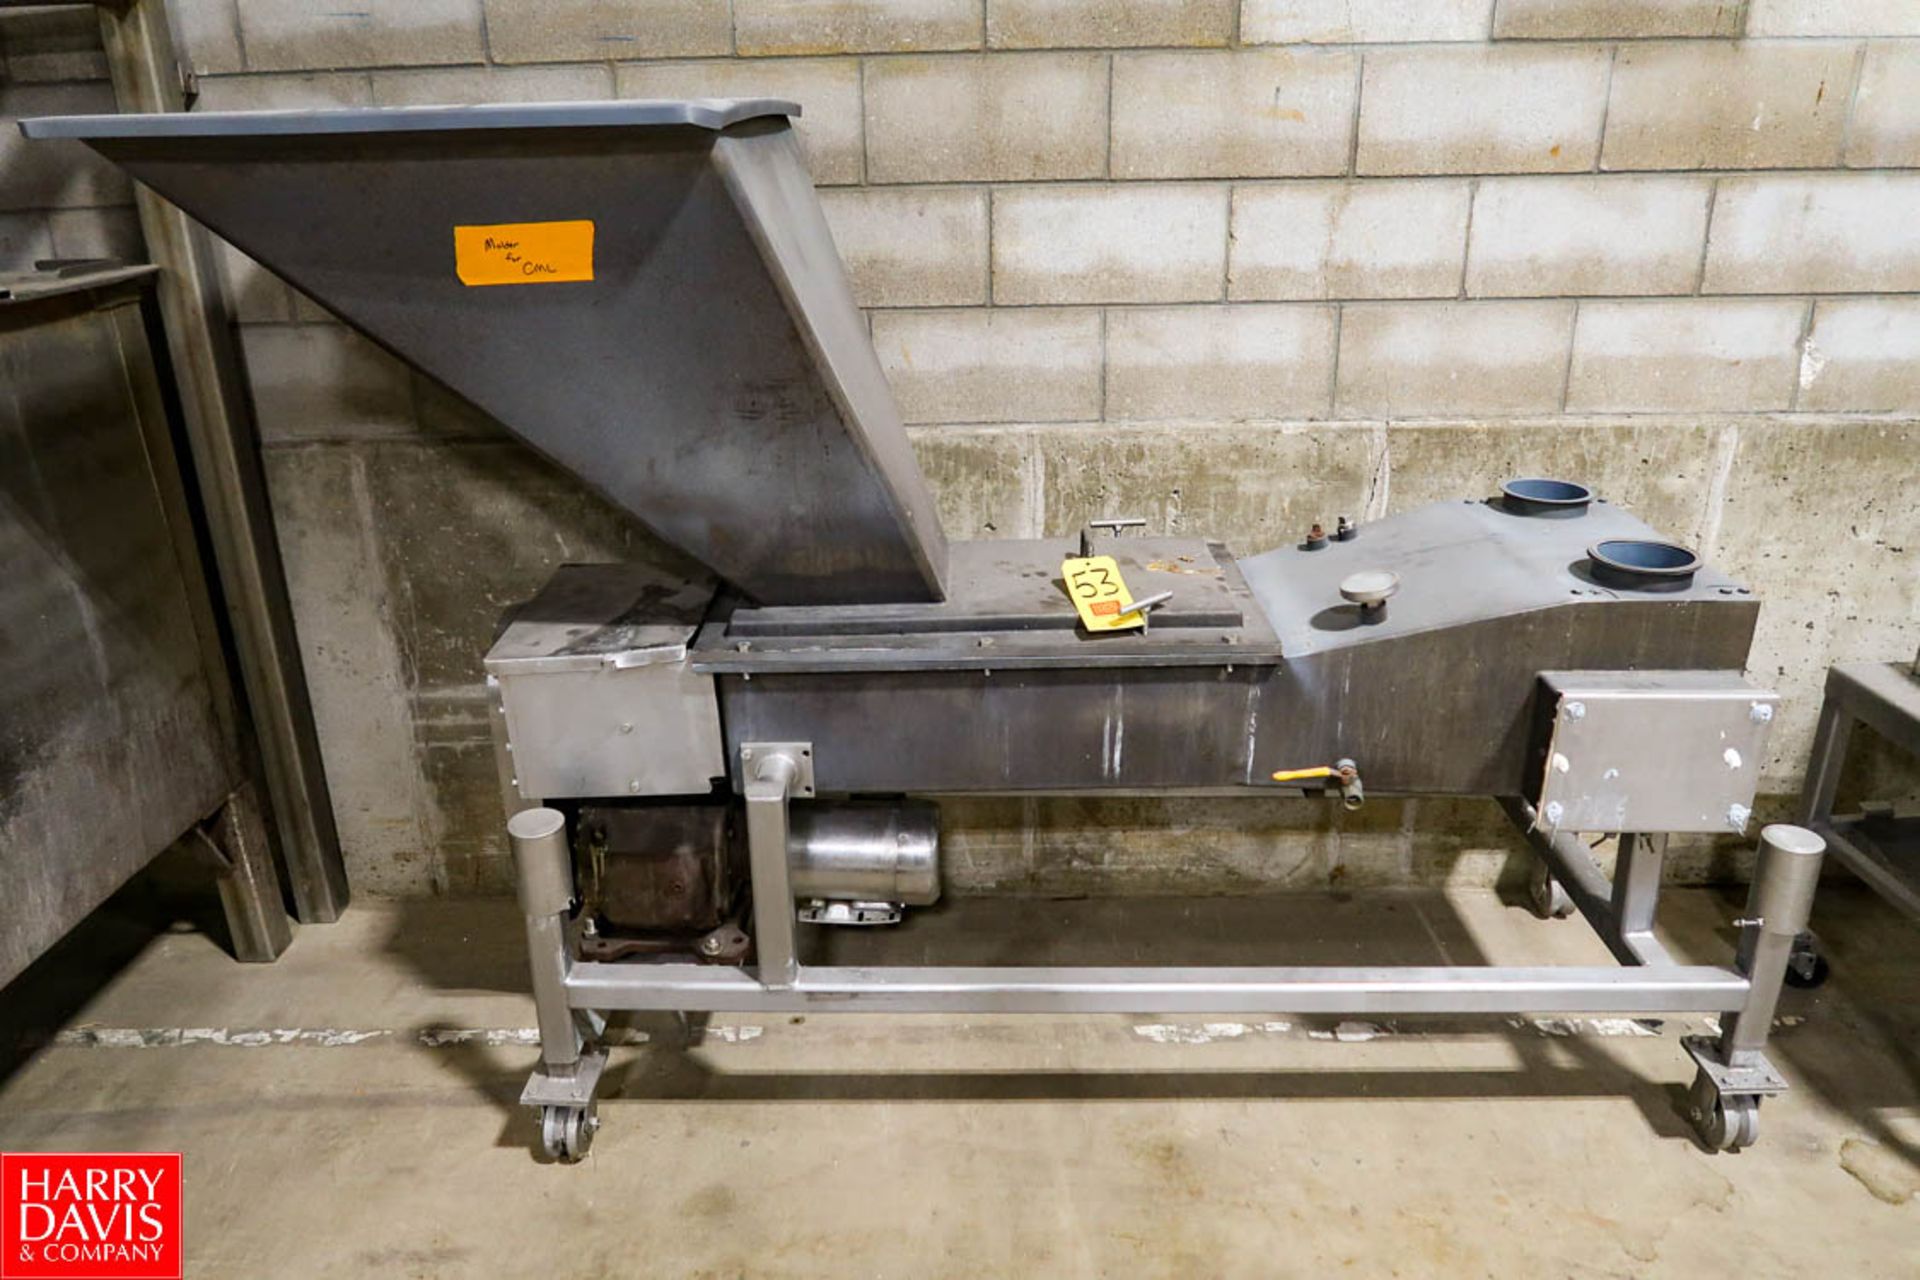 Twin Auger Teflon Coated Molder for Supreme CMC Cheese Molder Rigging Fee: $250